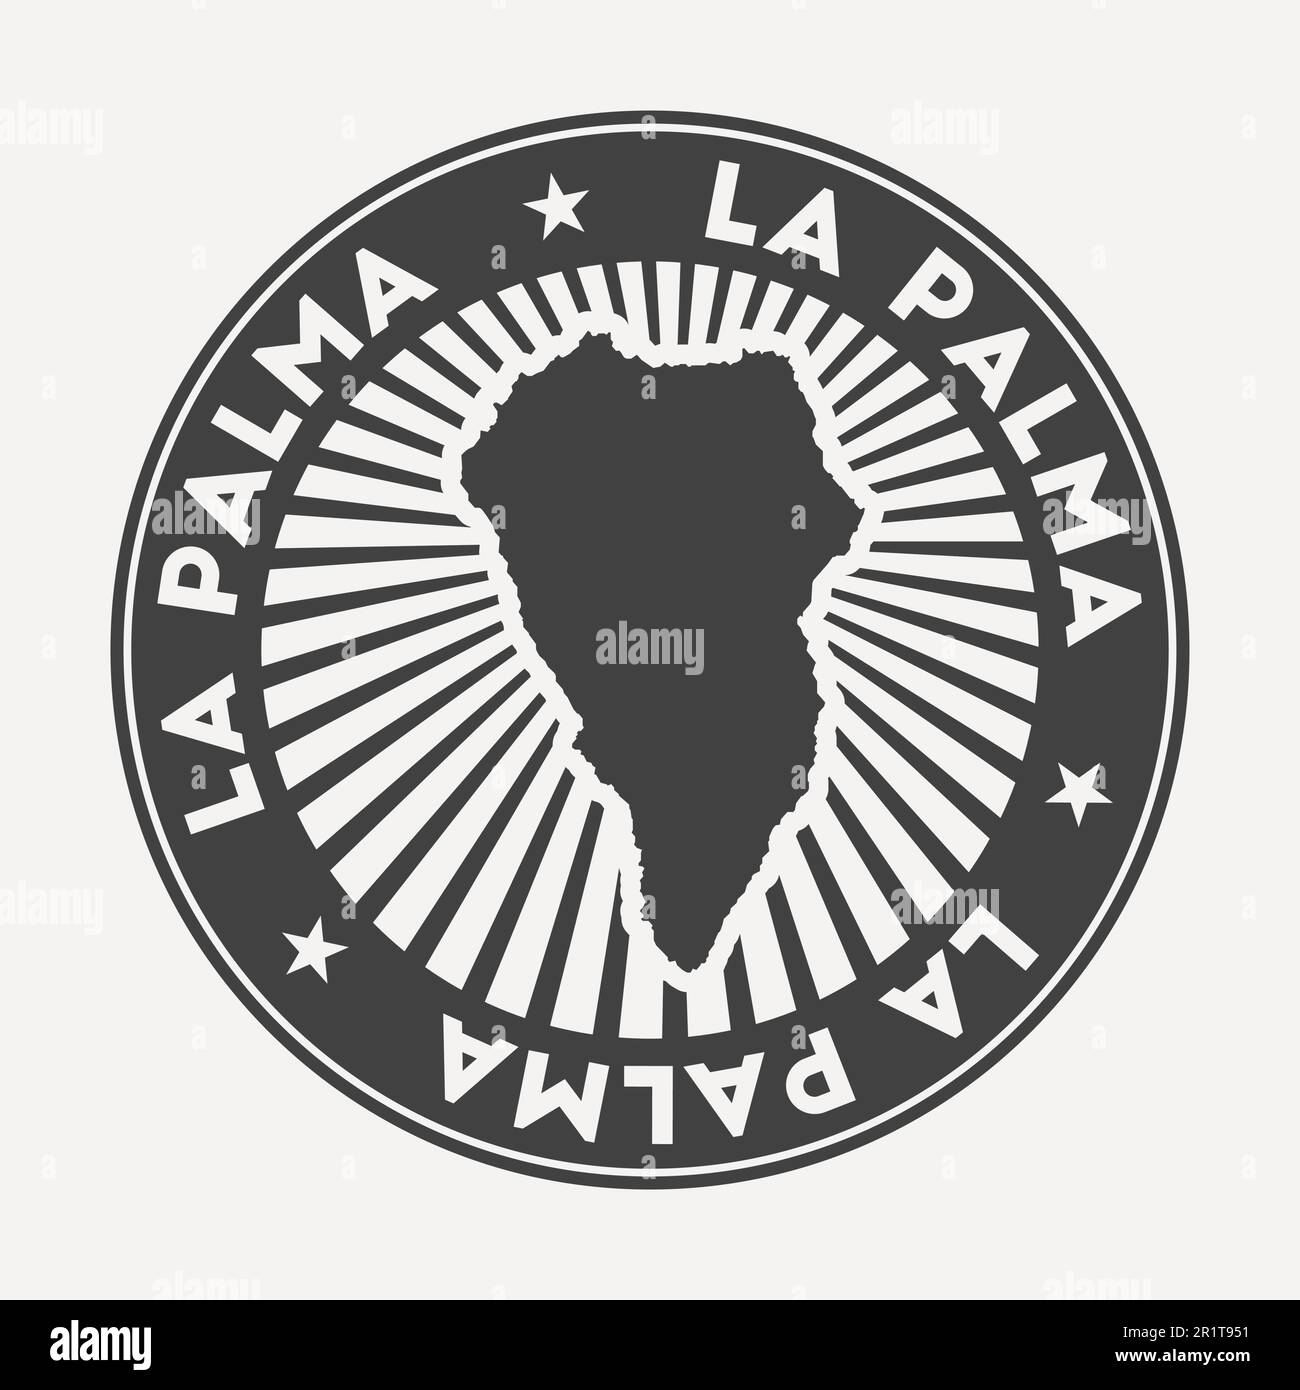 La Palma round logo. Vintage travel badge with the circular name and map of island, vector illustration. Can be used as insignia, logotype, label, sti Stock Vector